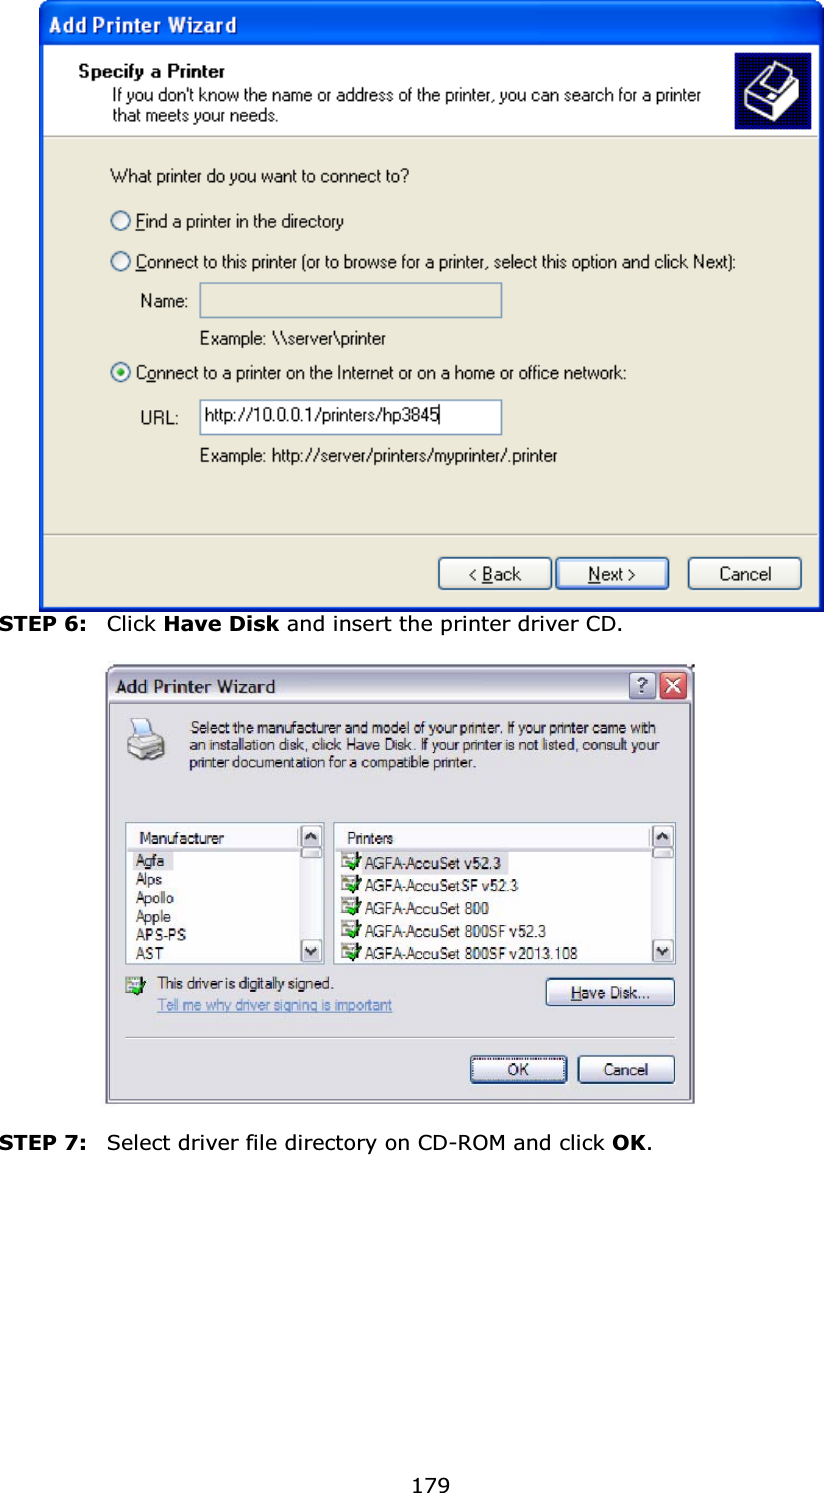 179STEP 6:  Click Have Disk and insert the printer driver CD.STEP 7:  Select driver file directory on CD-ROM and click OK.